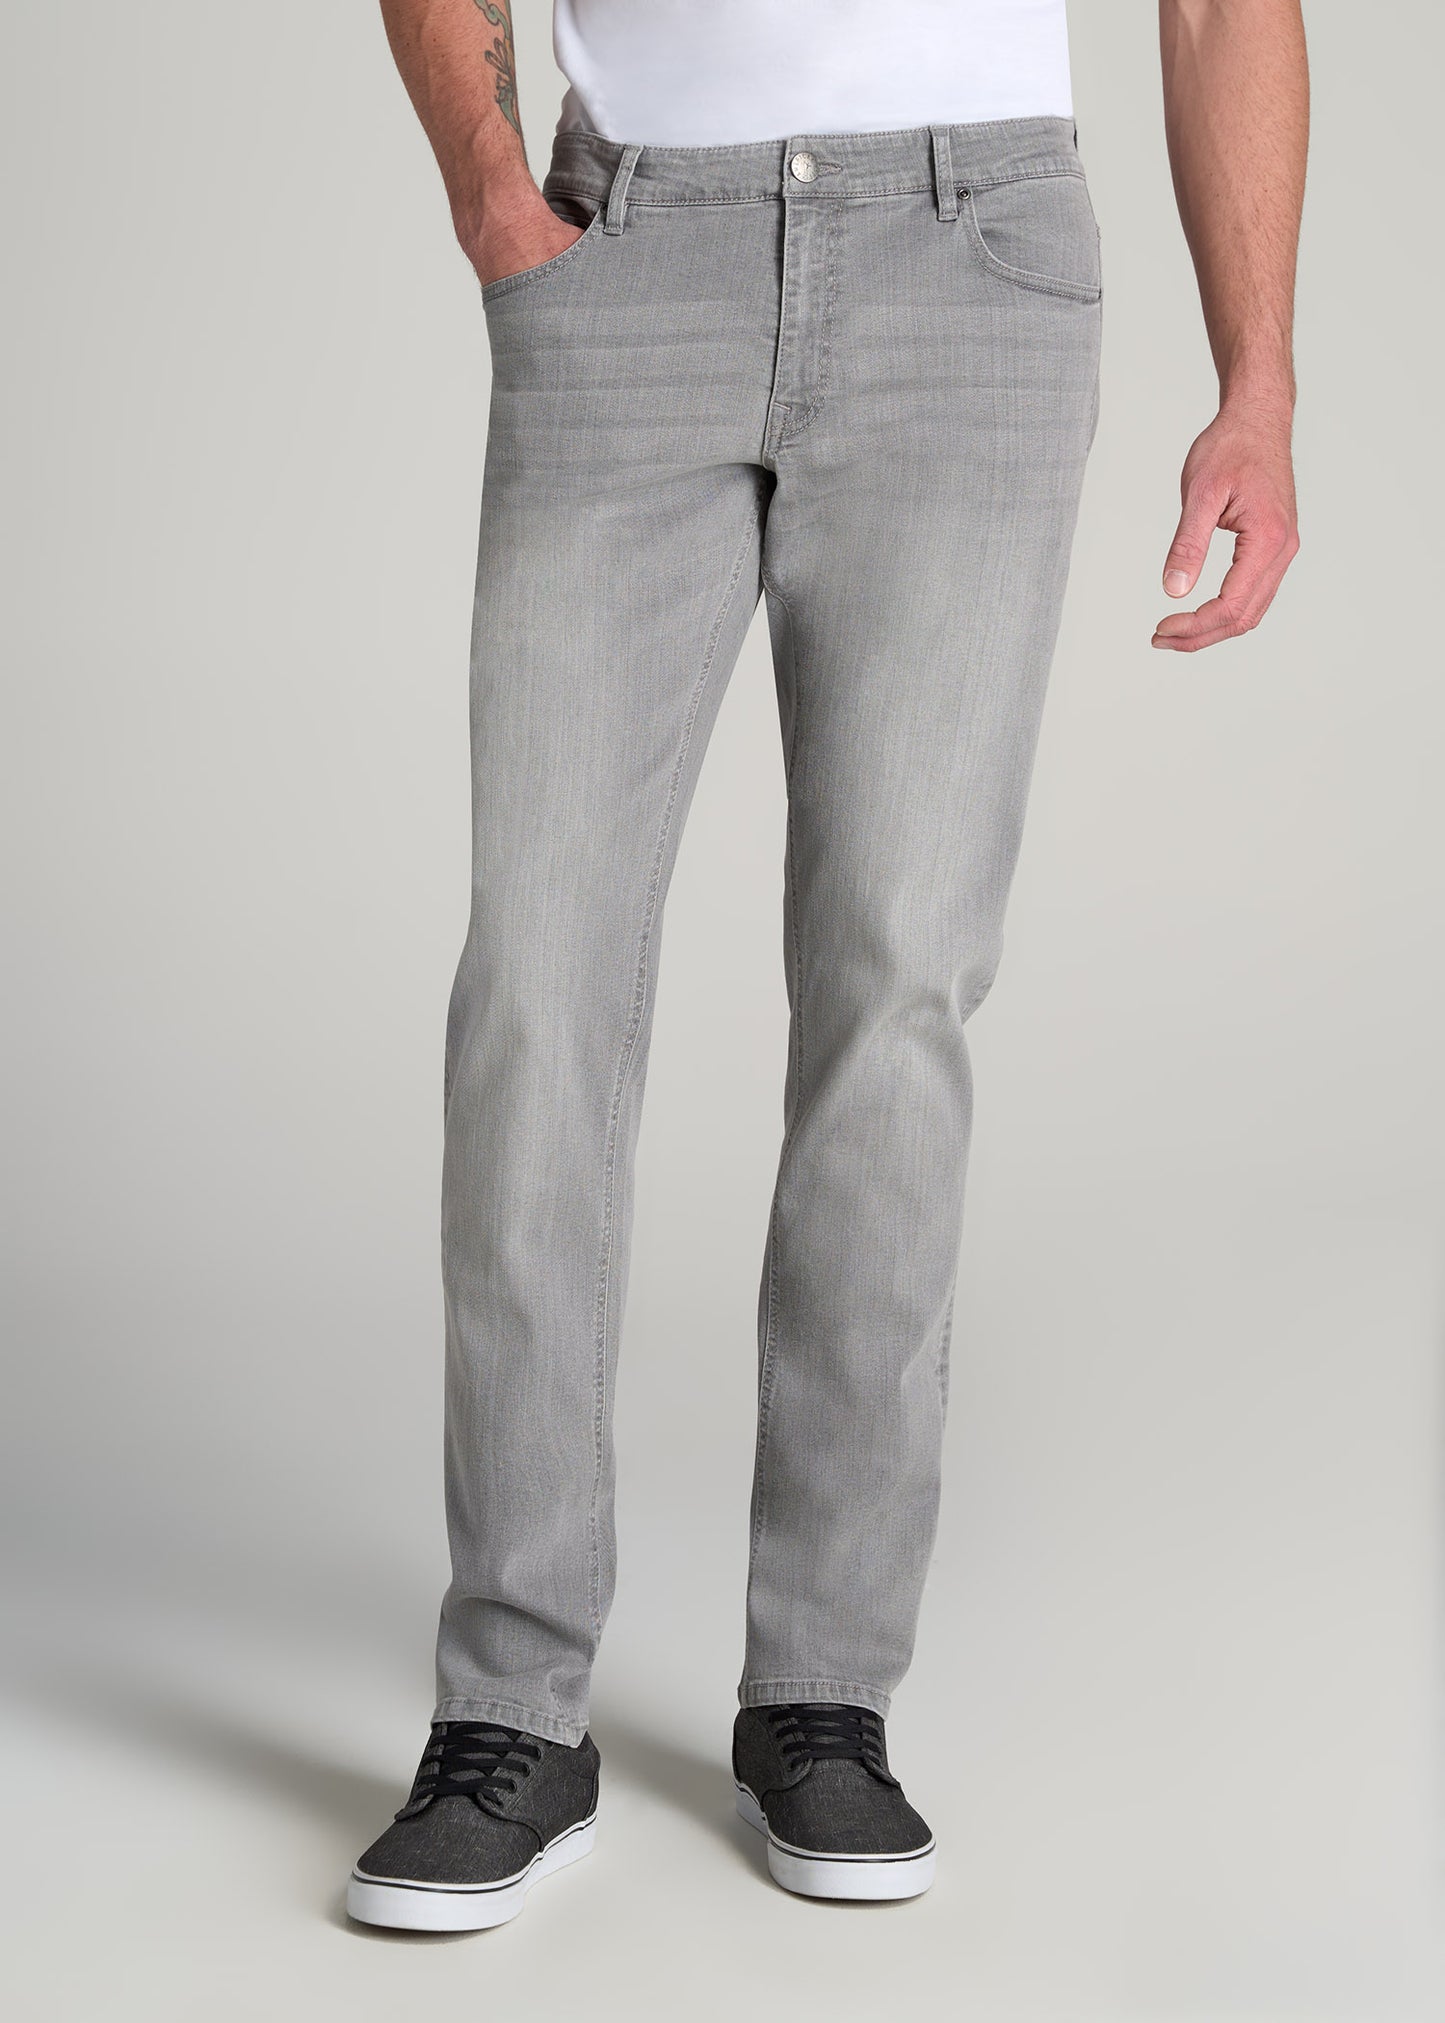    American-Tall-Men-Carman-Tapered-Fit-Jeans-Concrete-Grey-front